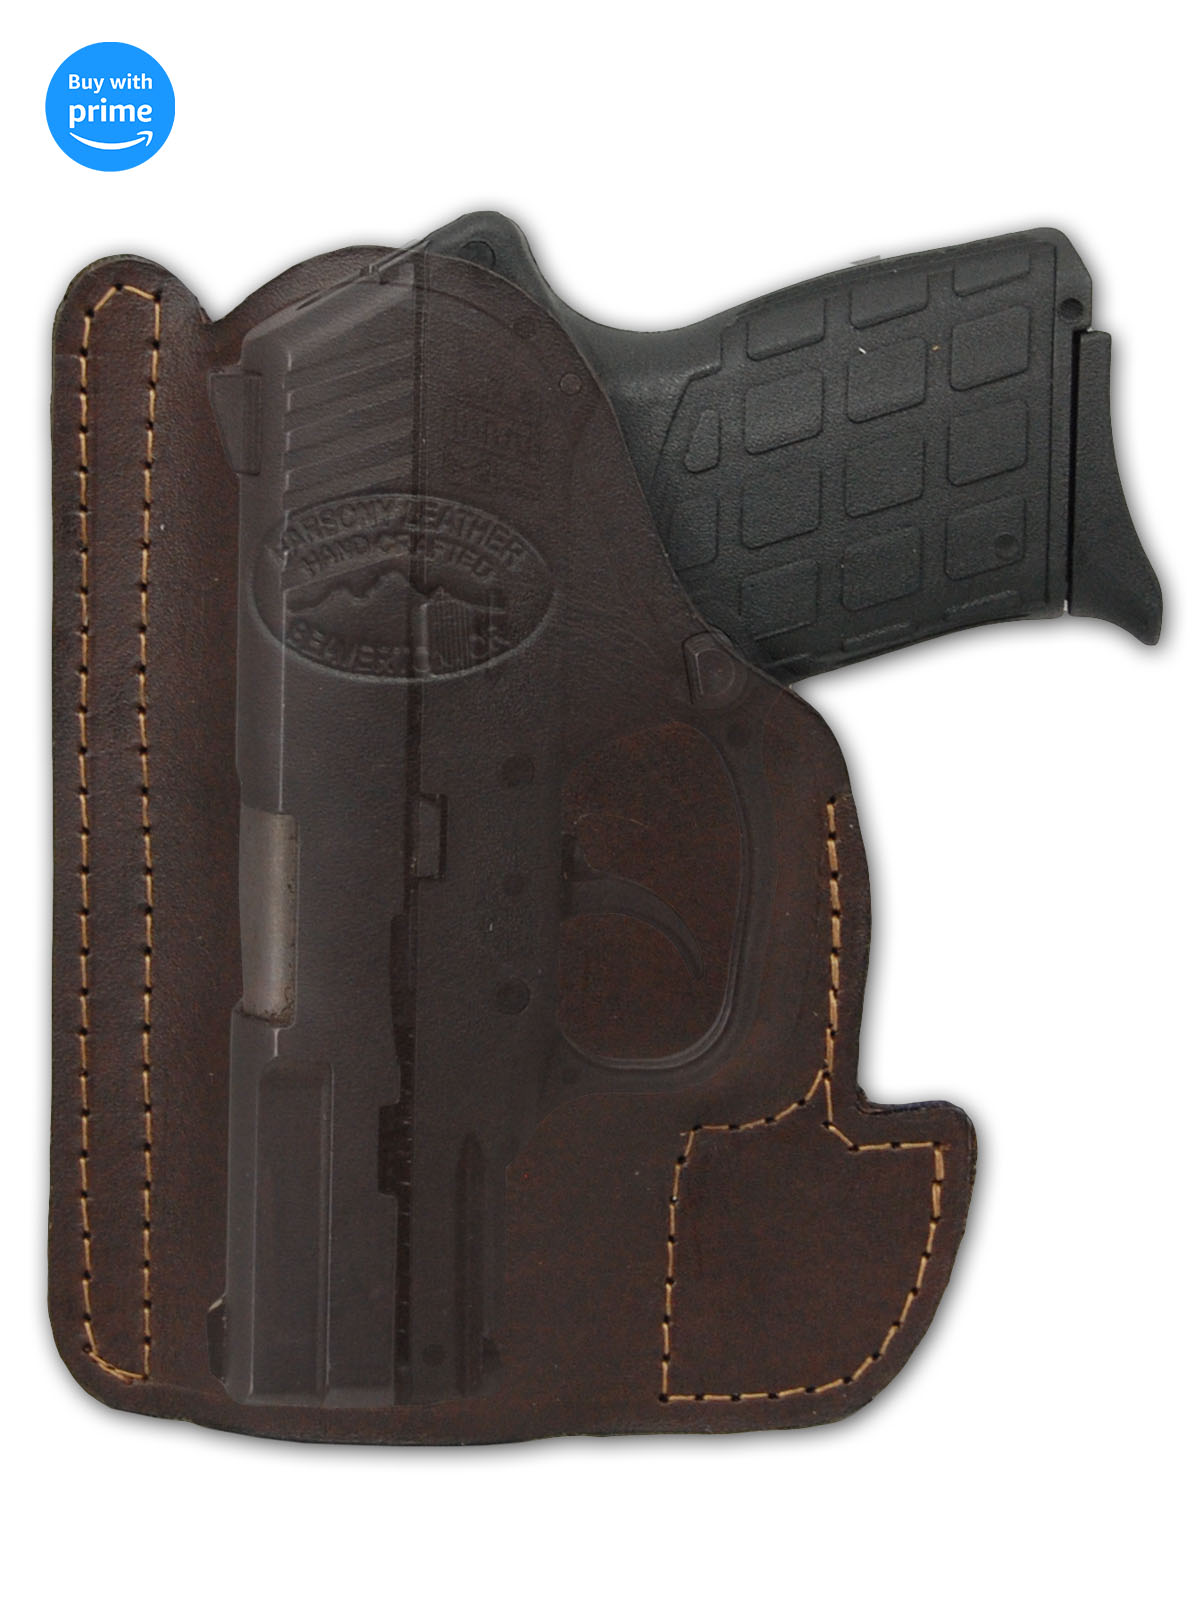 Barsony OWB Belt Clip Holster with Magazine Pouch for Kimber Micro 9mm  right - Buy with Prime